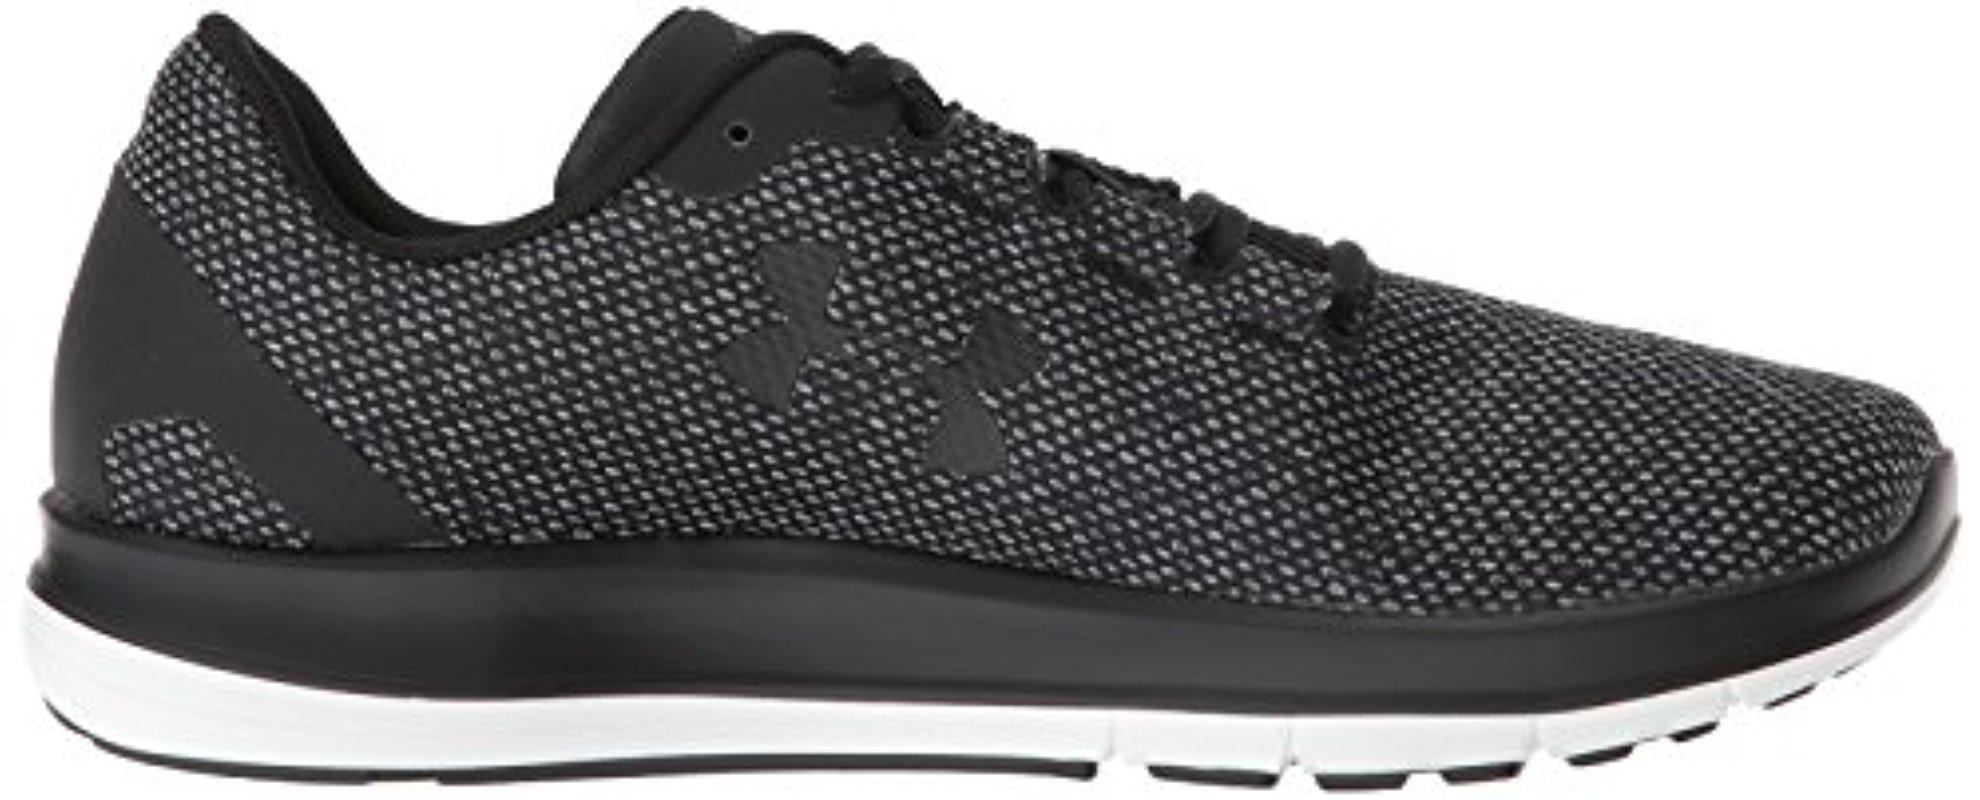 Under Armour Fw18 3020345-001 Training Shoes in Black Men | Lyst